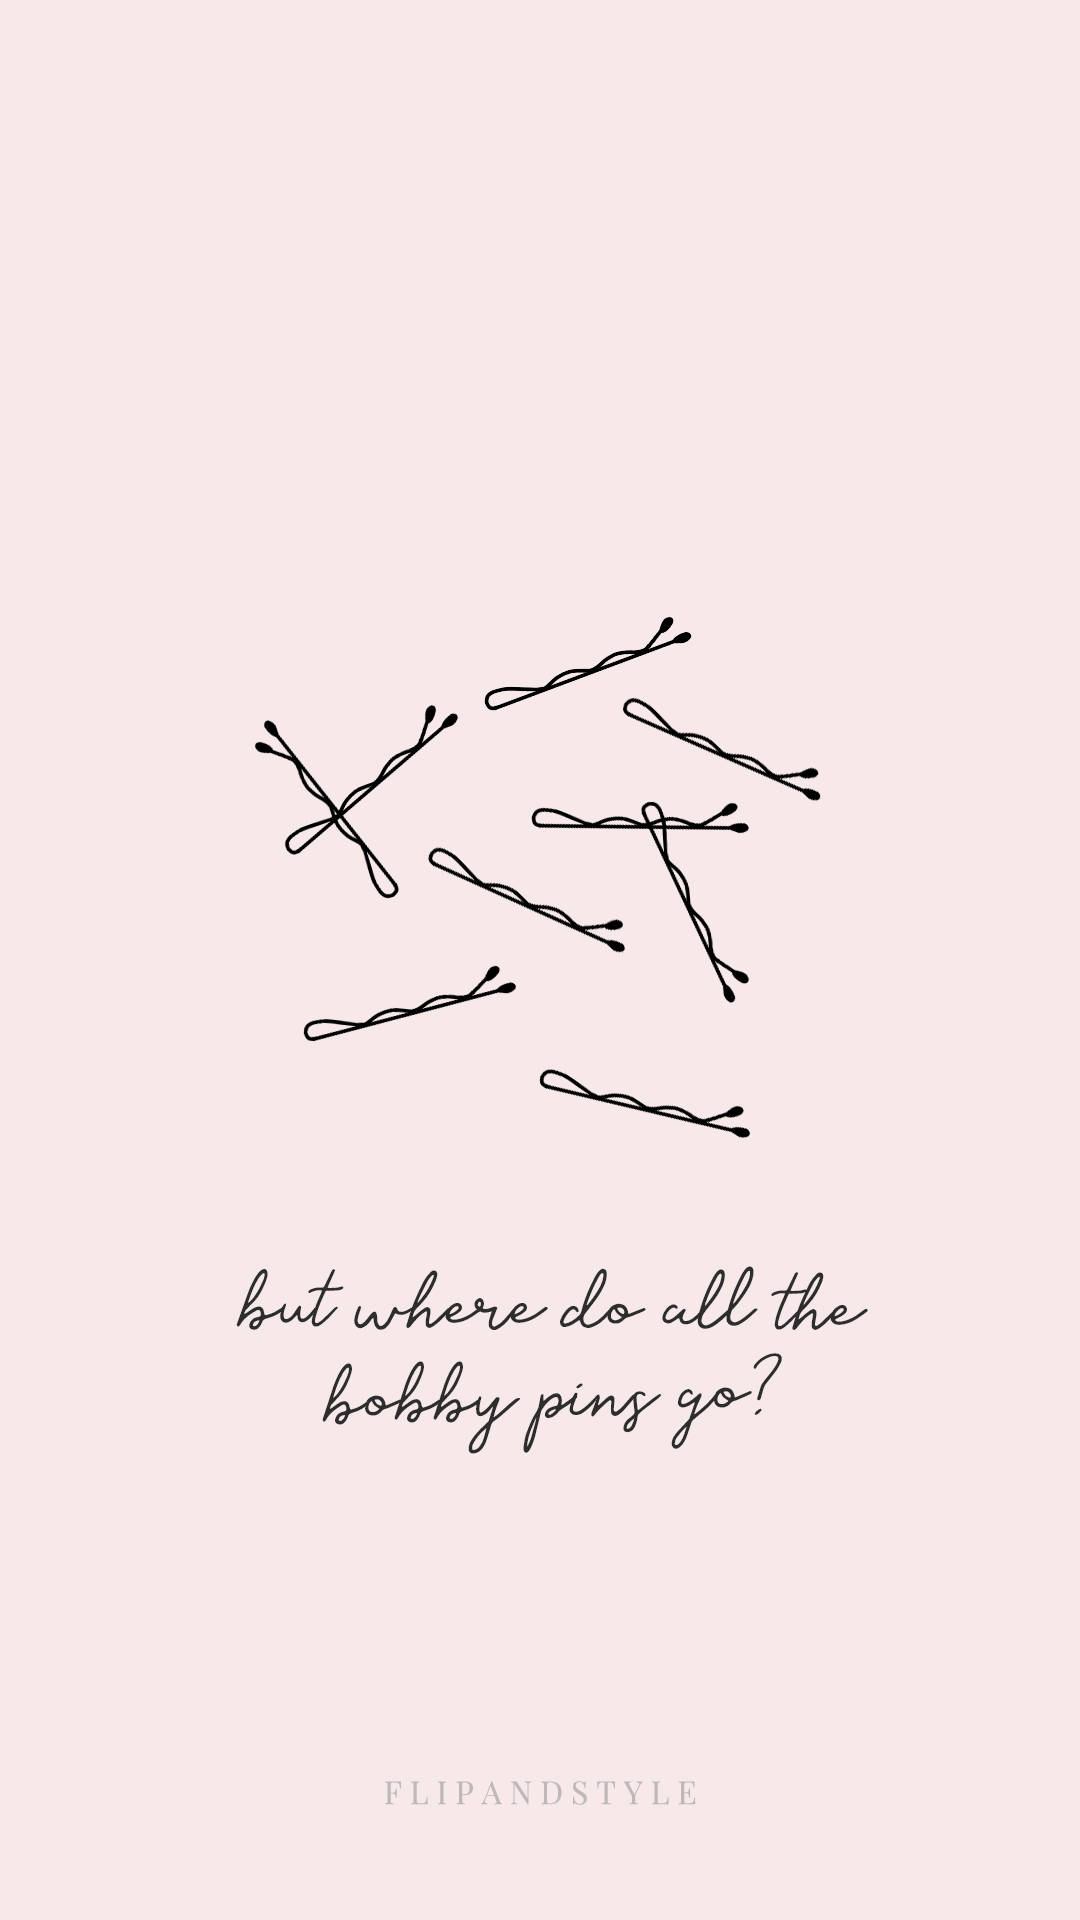 Cute Instagram With Bobby Pins